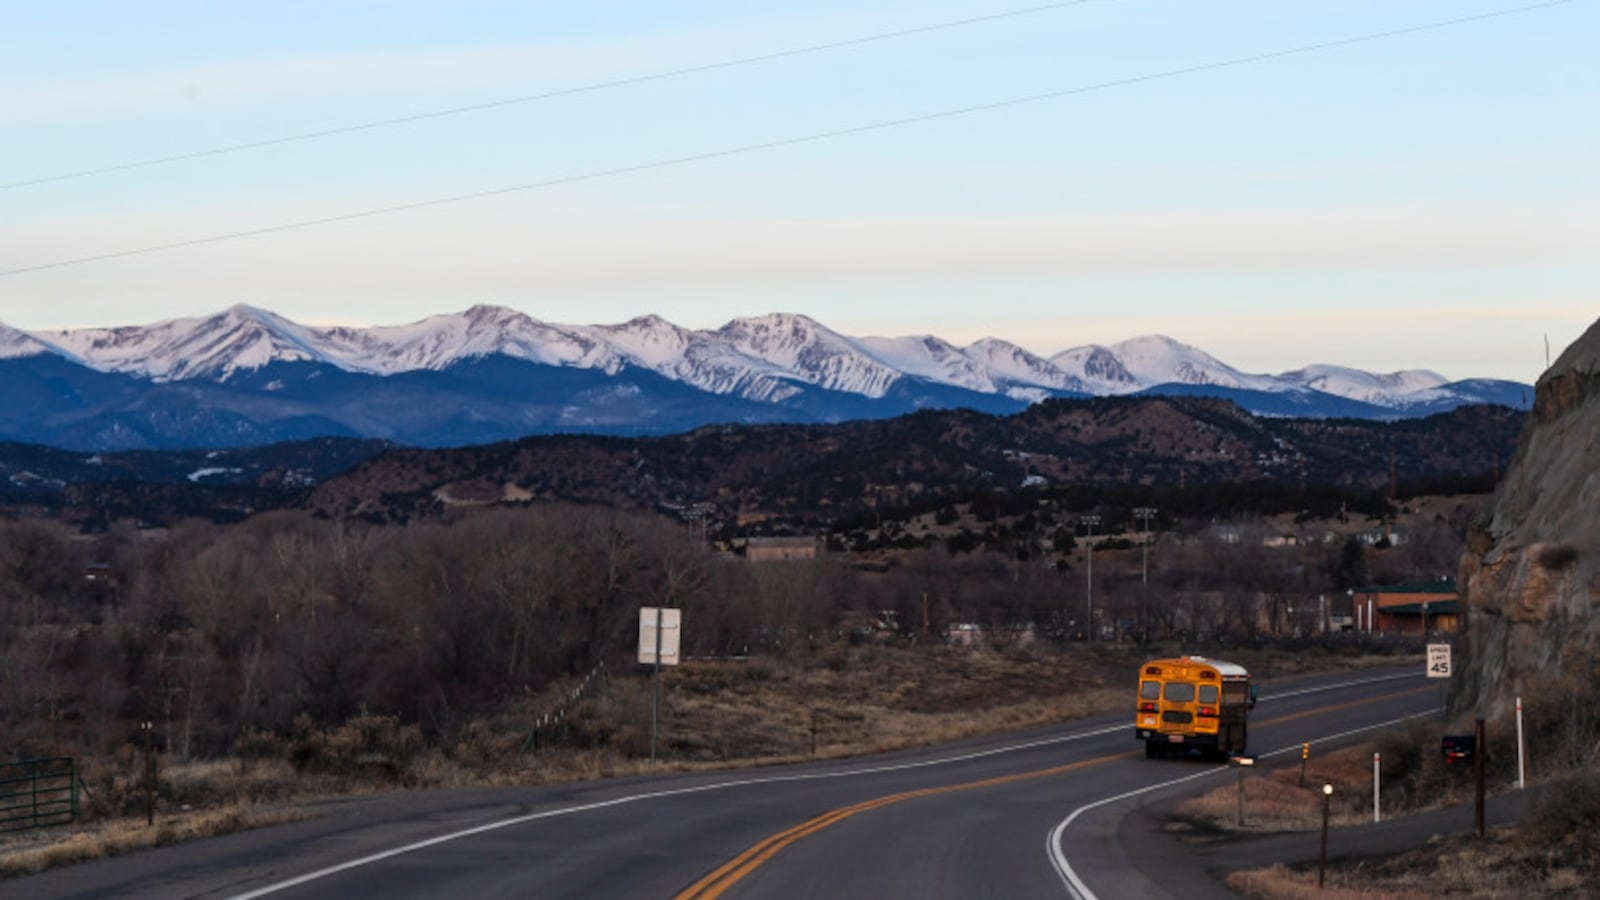 A school bus from the Primero district drives down a highway with the Sangre de Cristo mountains in the background.